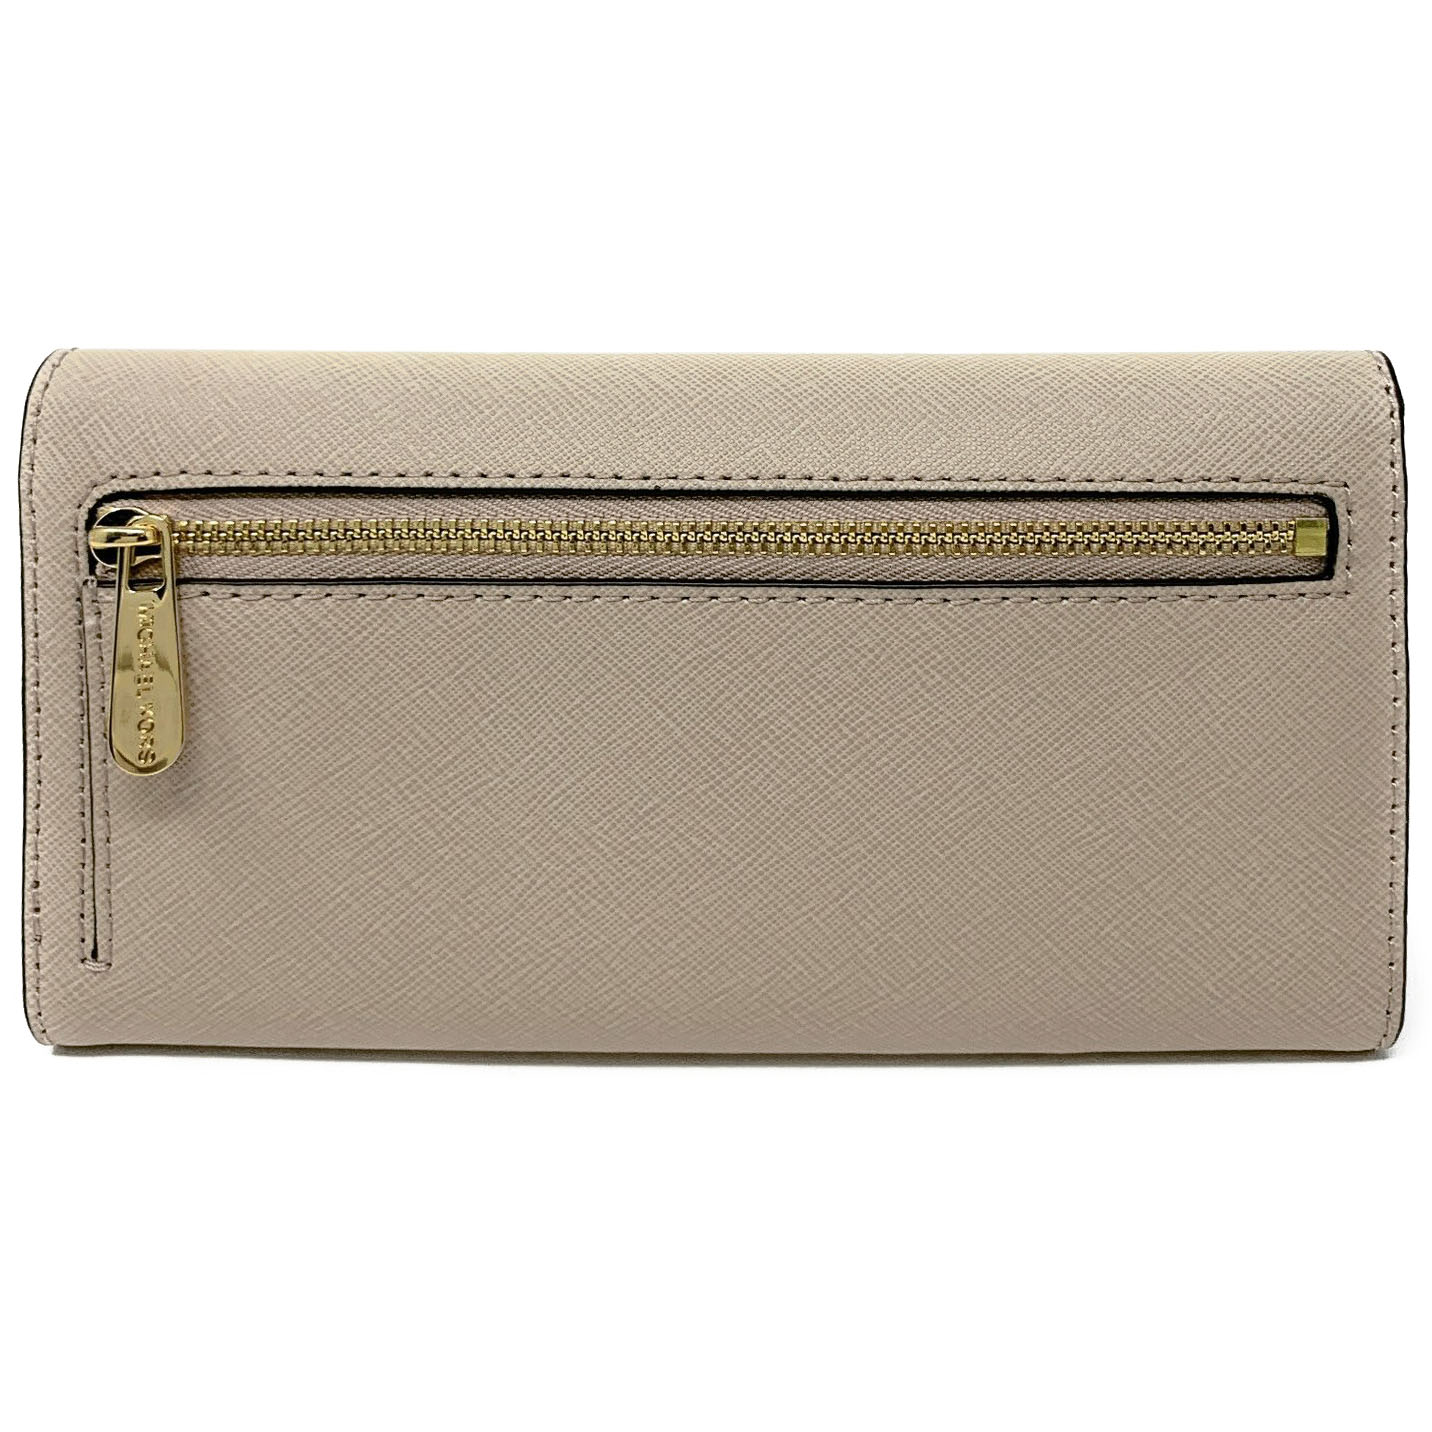 Michael Kors Wallet In Gift Box Large Trifold Wallet Bisque Beige Nude # 35S8GTVF7L